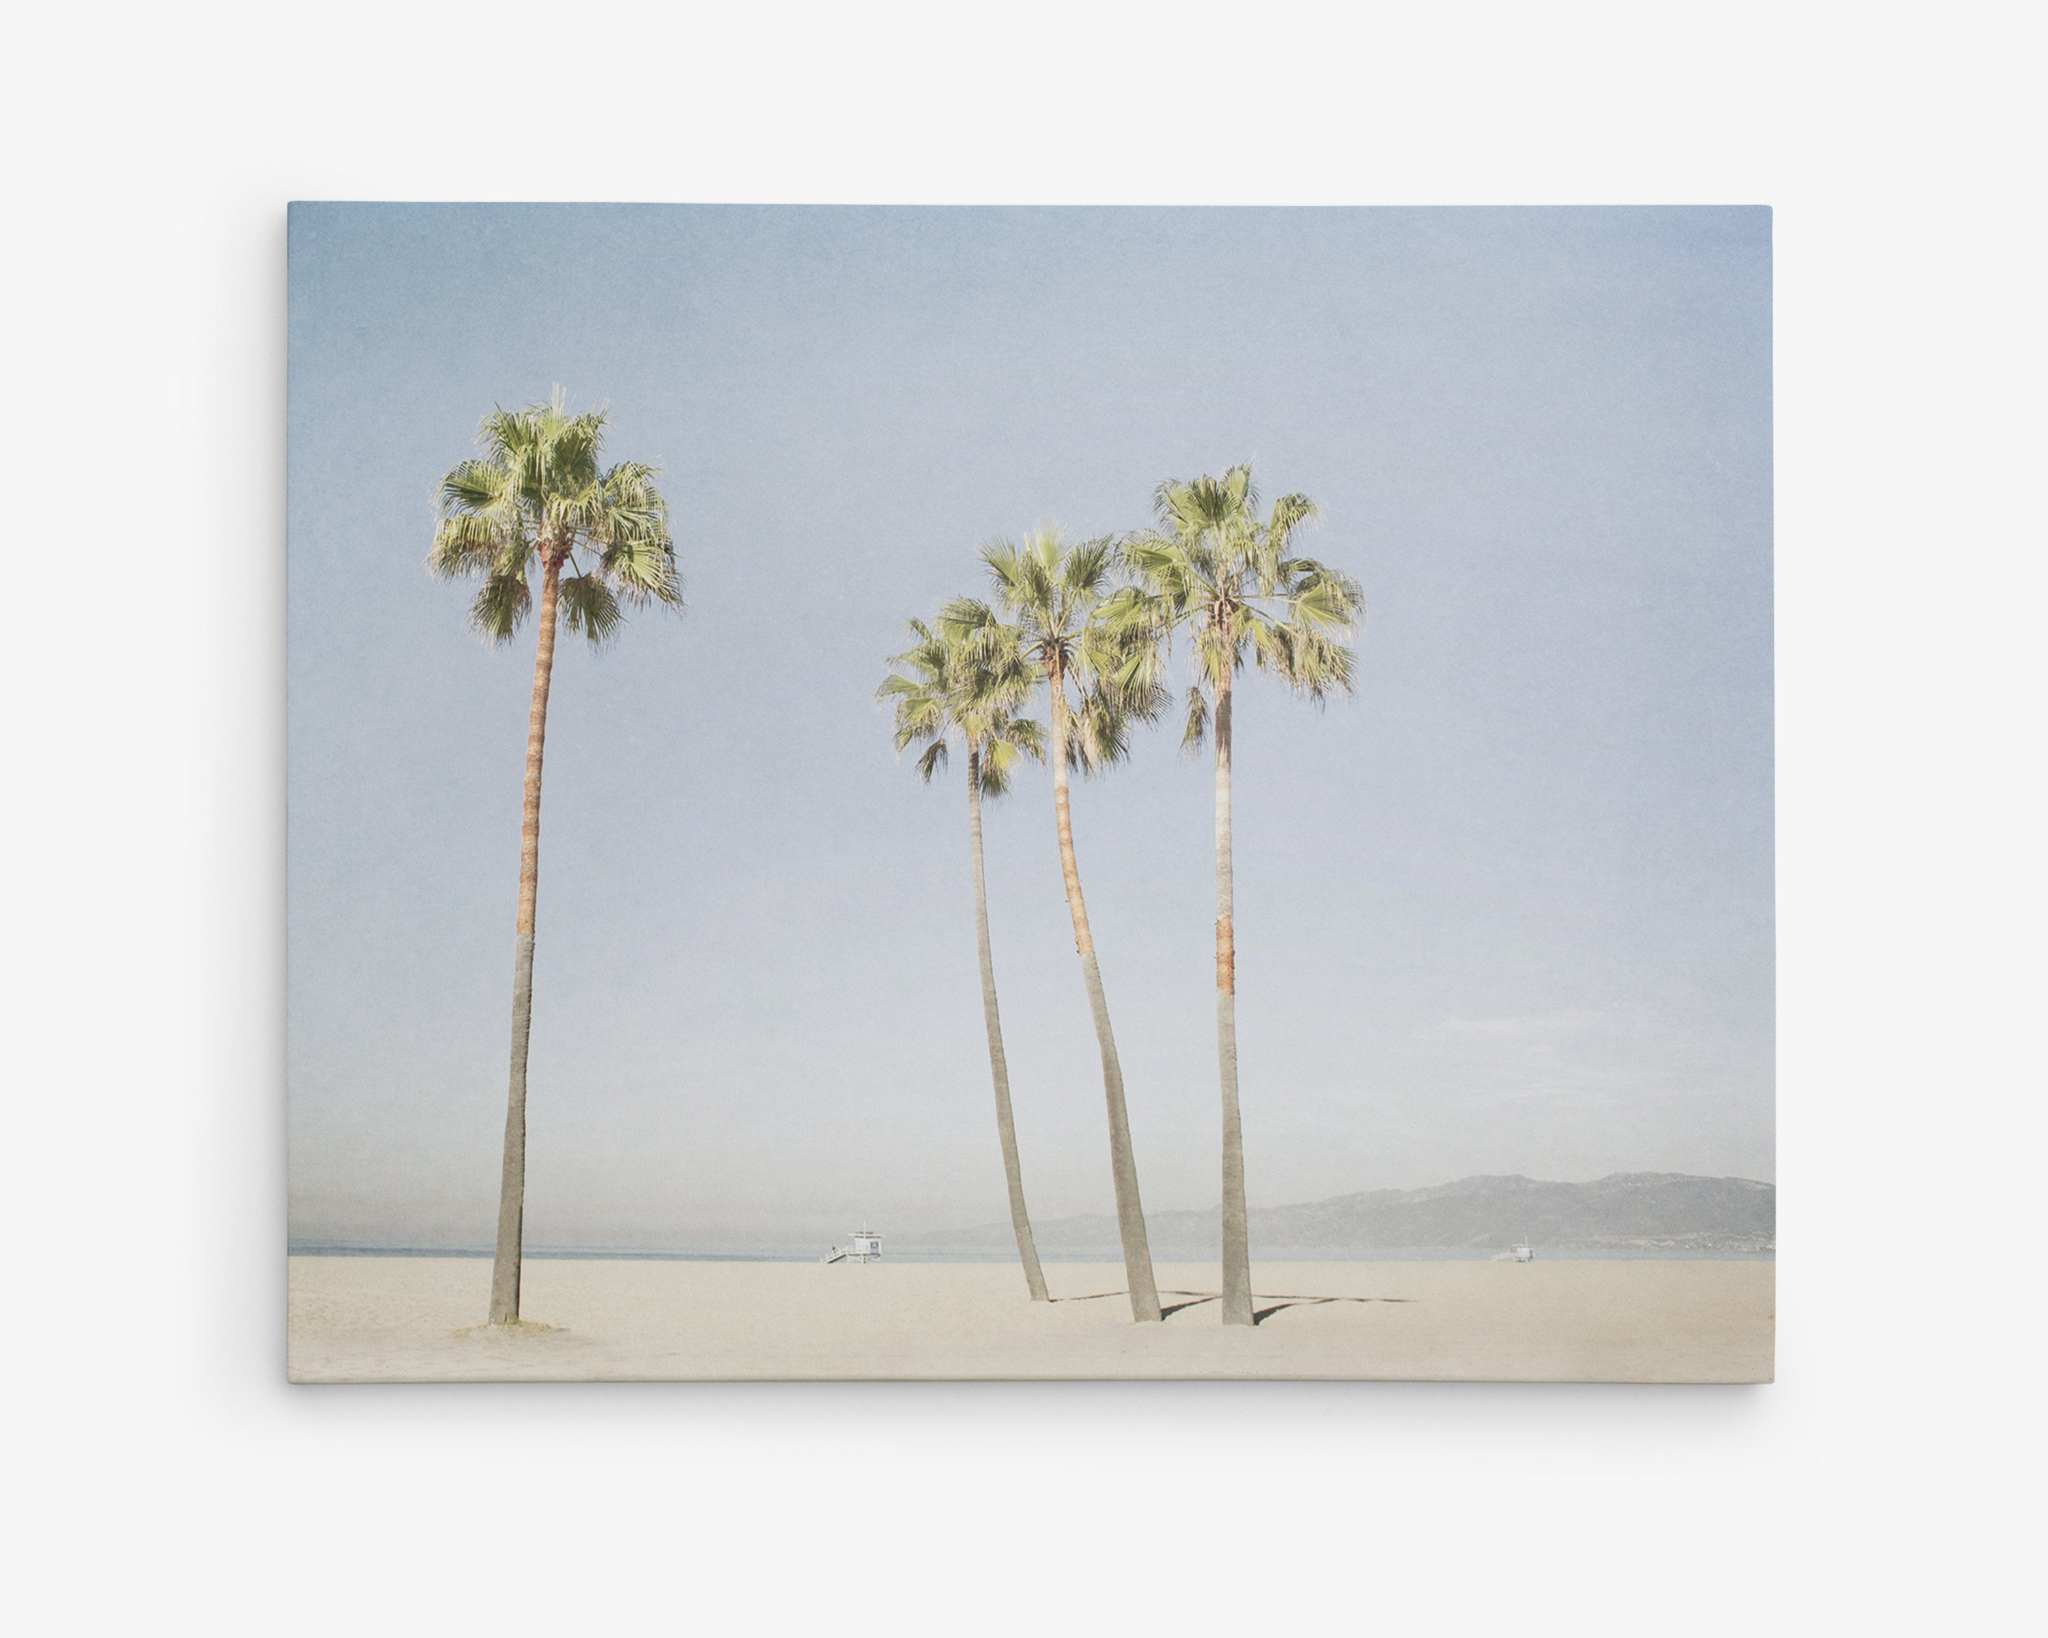 A serene beach with golden sand and five tall palm trees standing in a line, reminiscent of Venice Beach. The sky is clear and blue, with distant mountains visible on the horizon. Two small boats can be seen on the calm water in the background, captured beautifully on Offley Green's California Venice Beach Canvas Wall Art, 'Boardwalk Palms'.